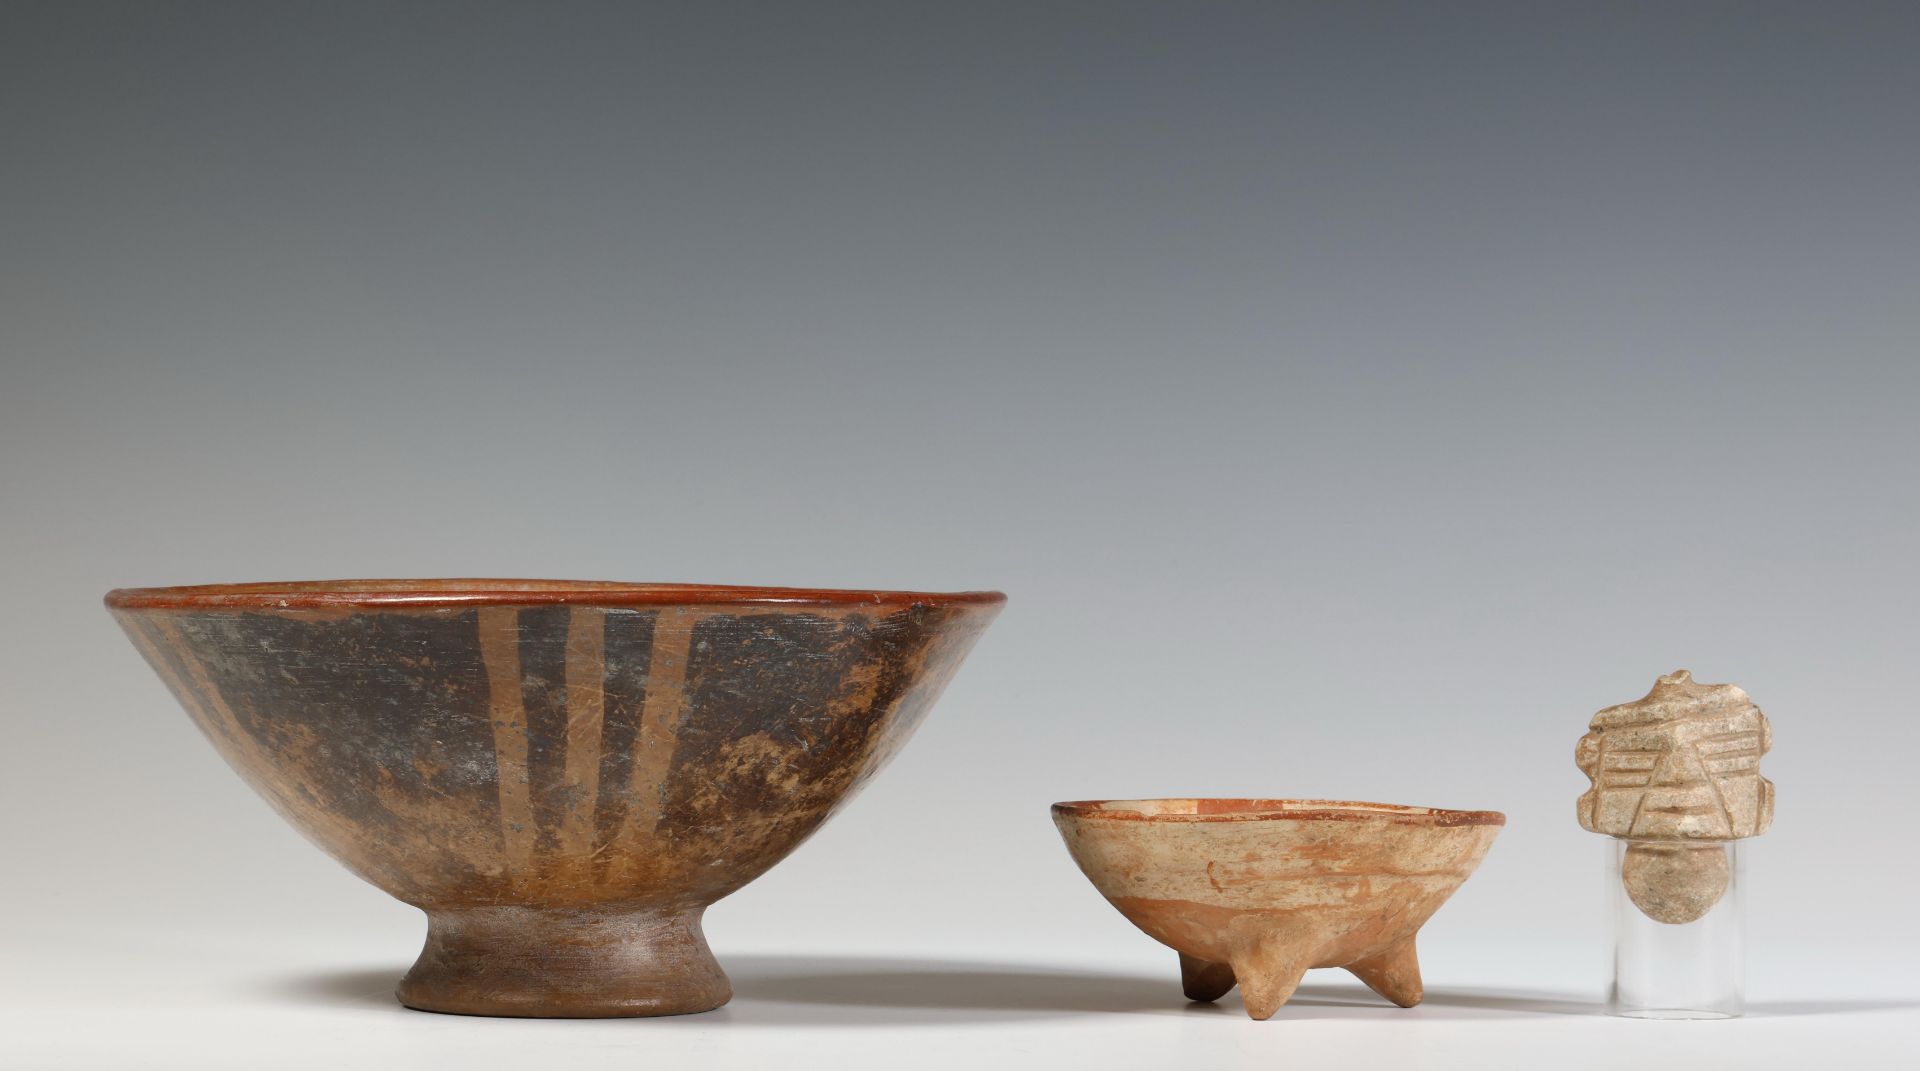 Colombia, Narino, 1200 - 1500 AD, two terracotta bowls. - Image 3 of 3